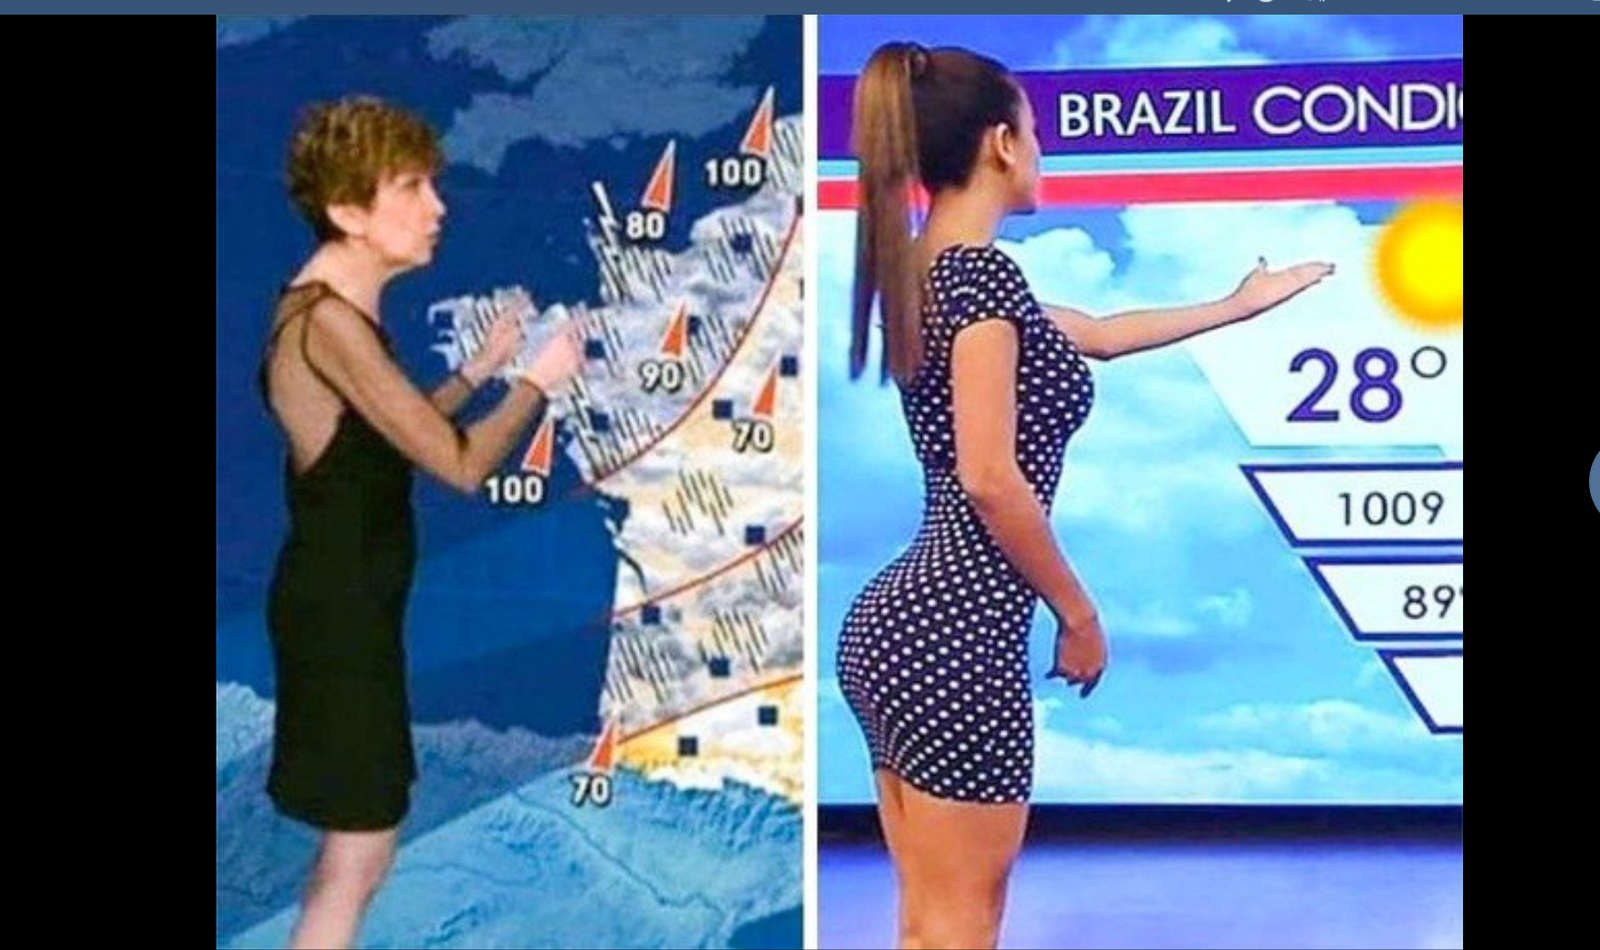 And why does the French weather forecast have lower ratings than Brazil? - Weather, Rating, beauty, Leading, Brazil, France, Studio